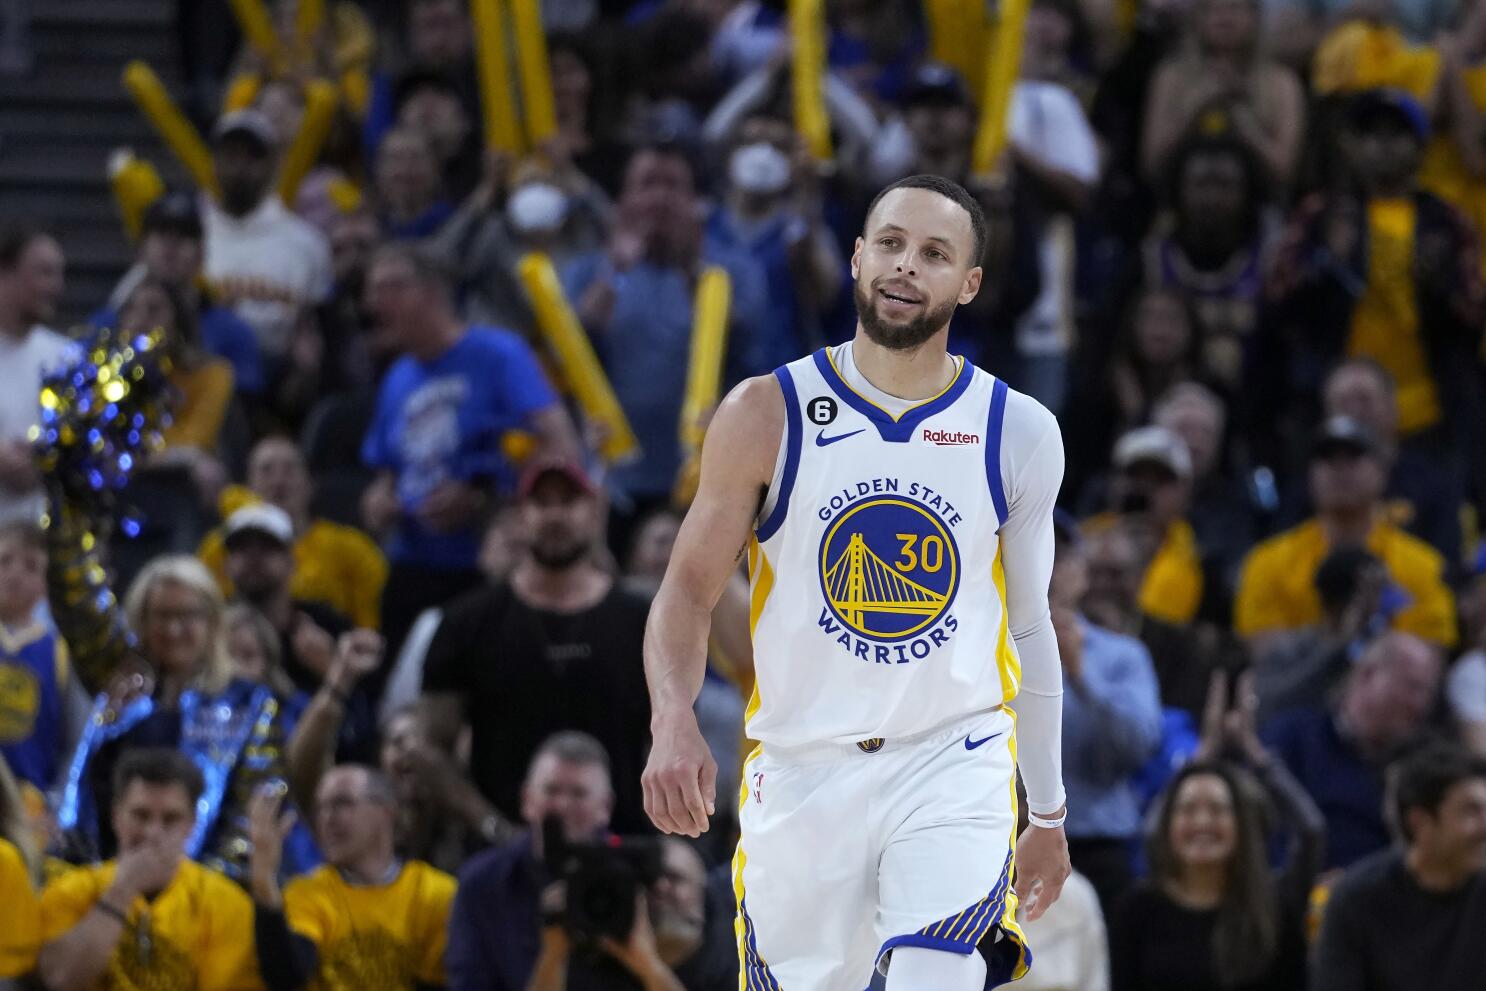 What does Warriors' Steph Curry's injury mean for Sixers, Knicks